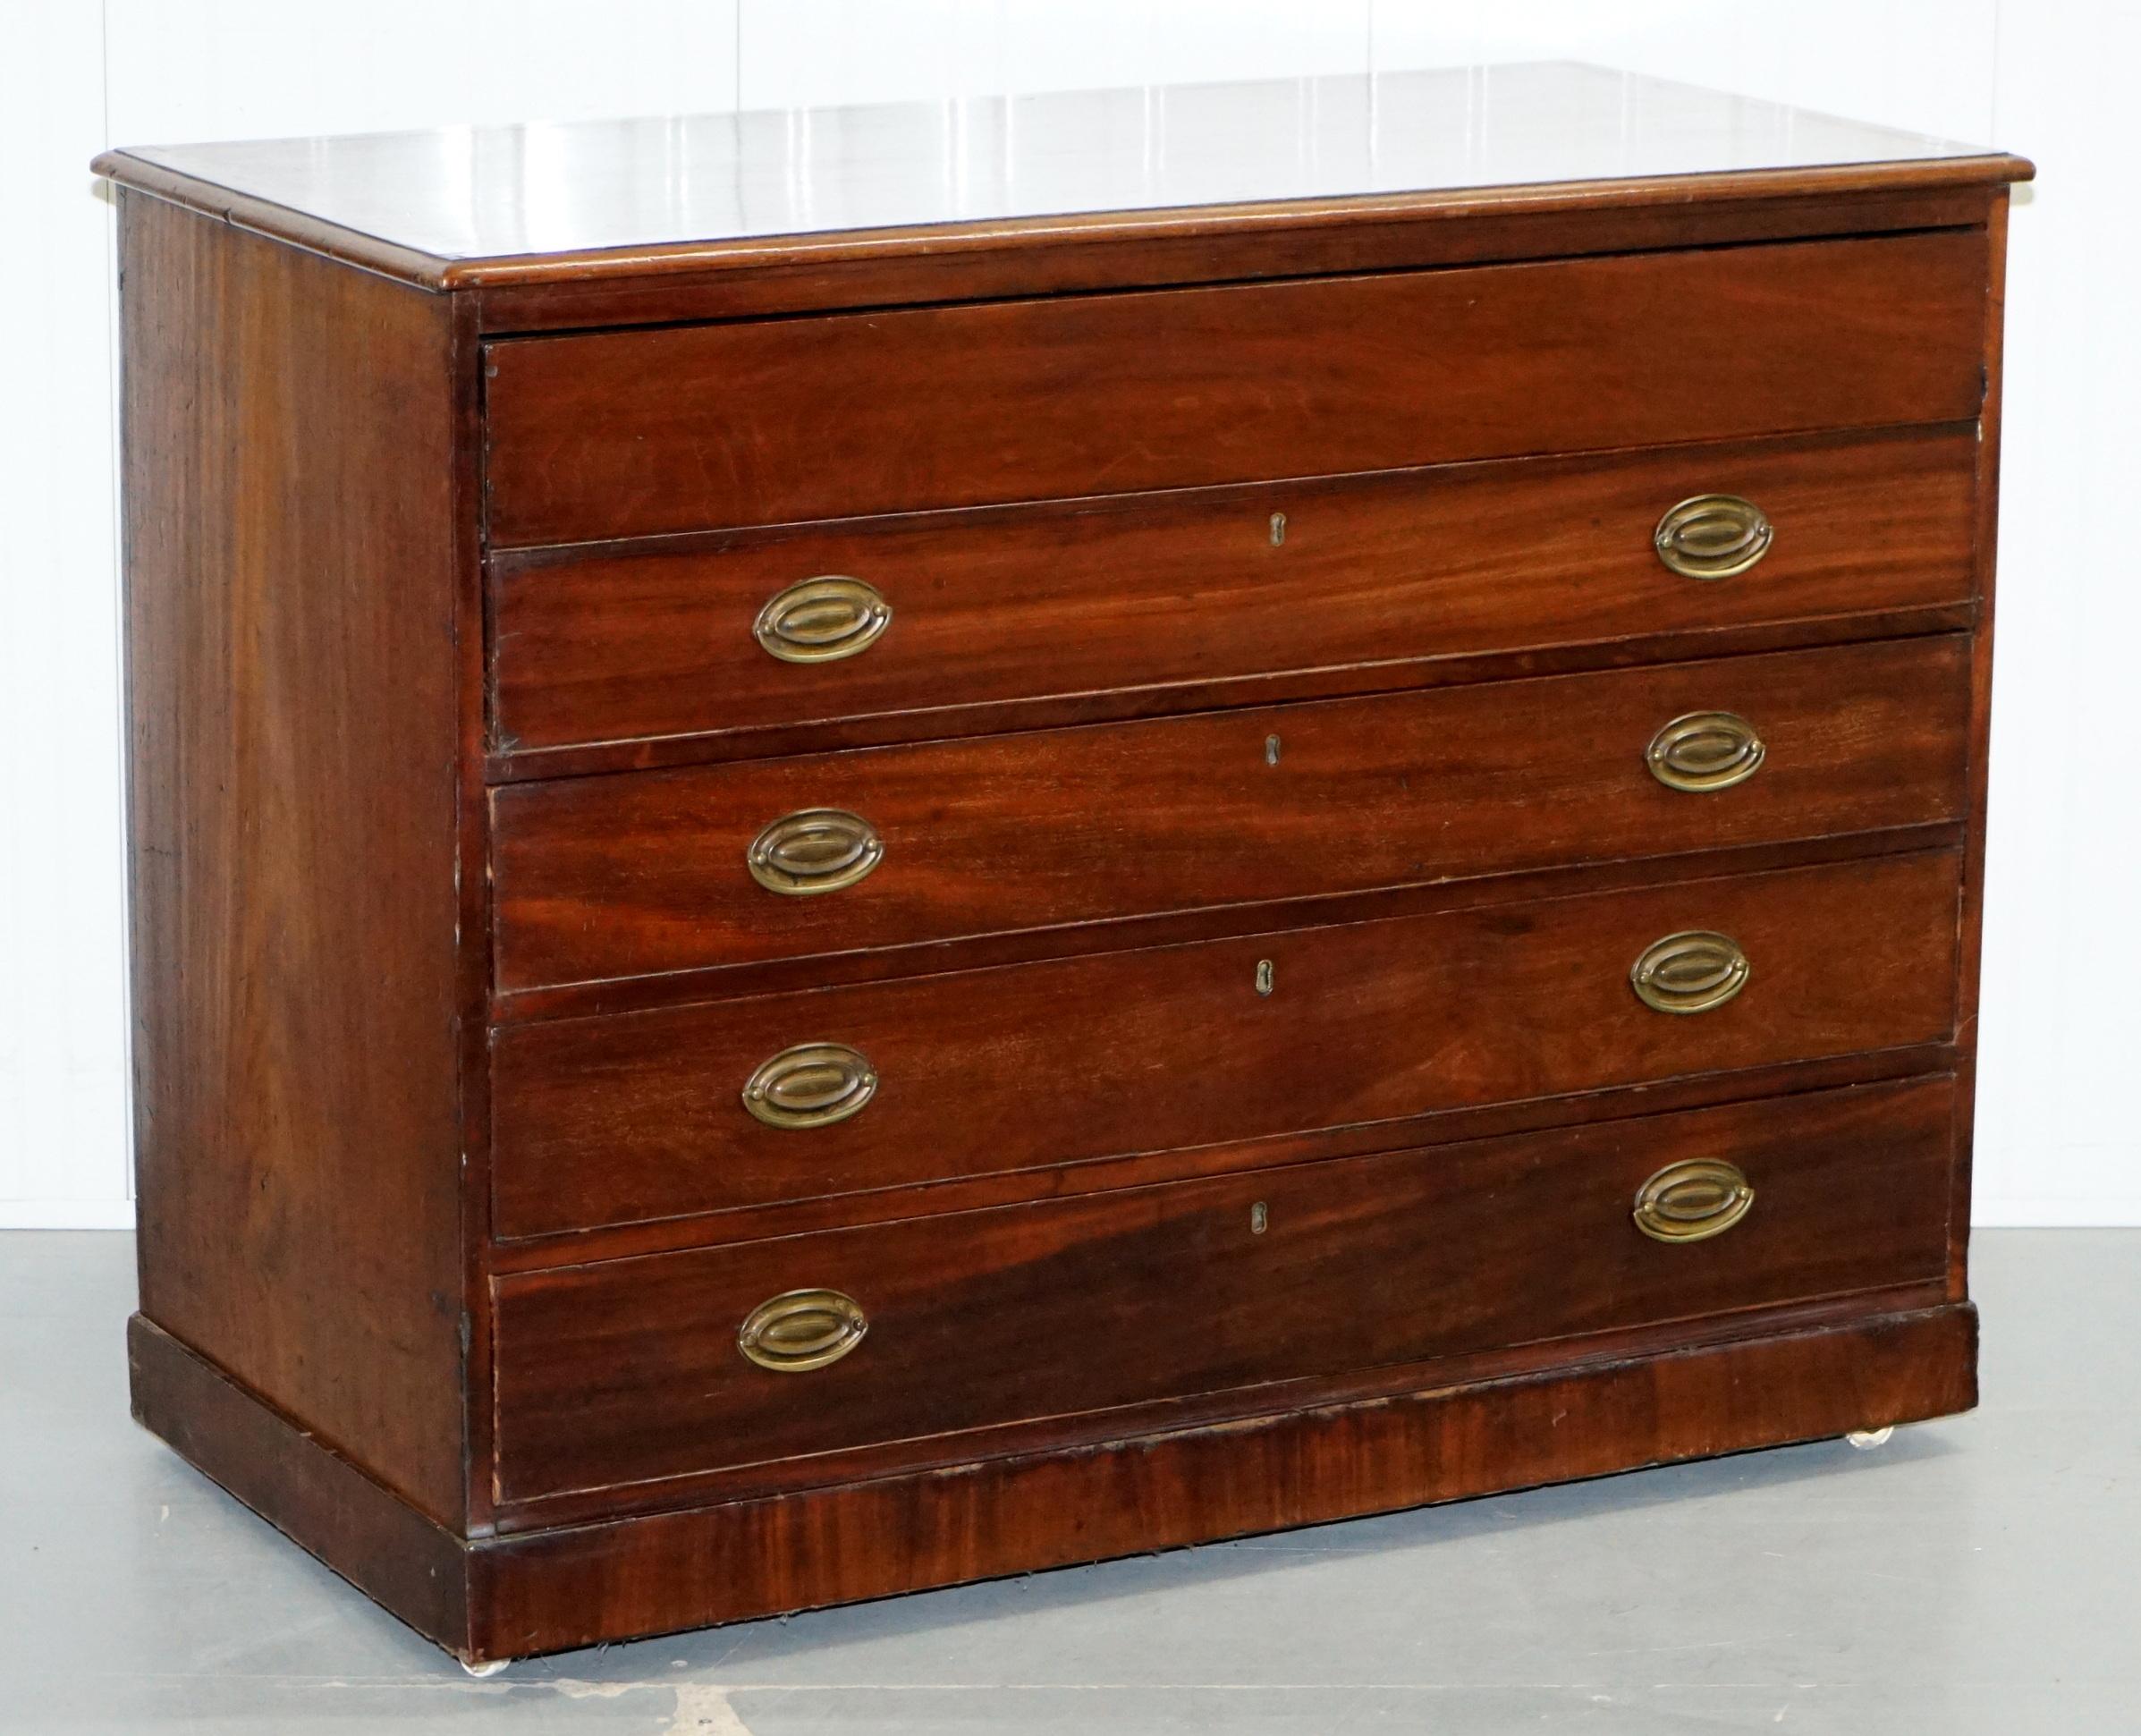 We are delighted to offer for sale this very rare circa 1790 Georgian writing Library chest of drawers with desk secretaire by Gillows of Lancaster and London

A rare find, looking through Gillows of Lancaster and London 1730-1840 I've found a